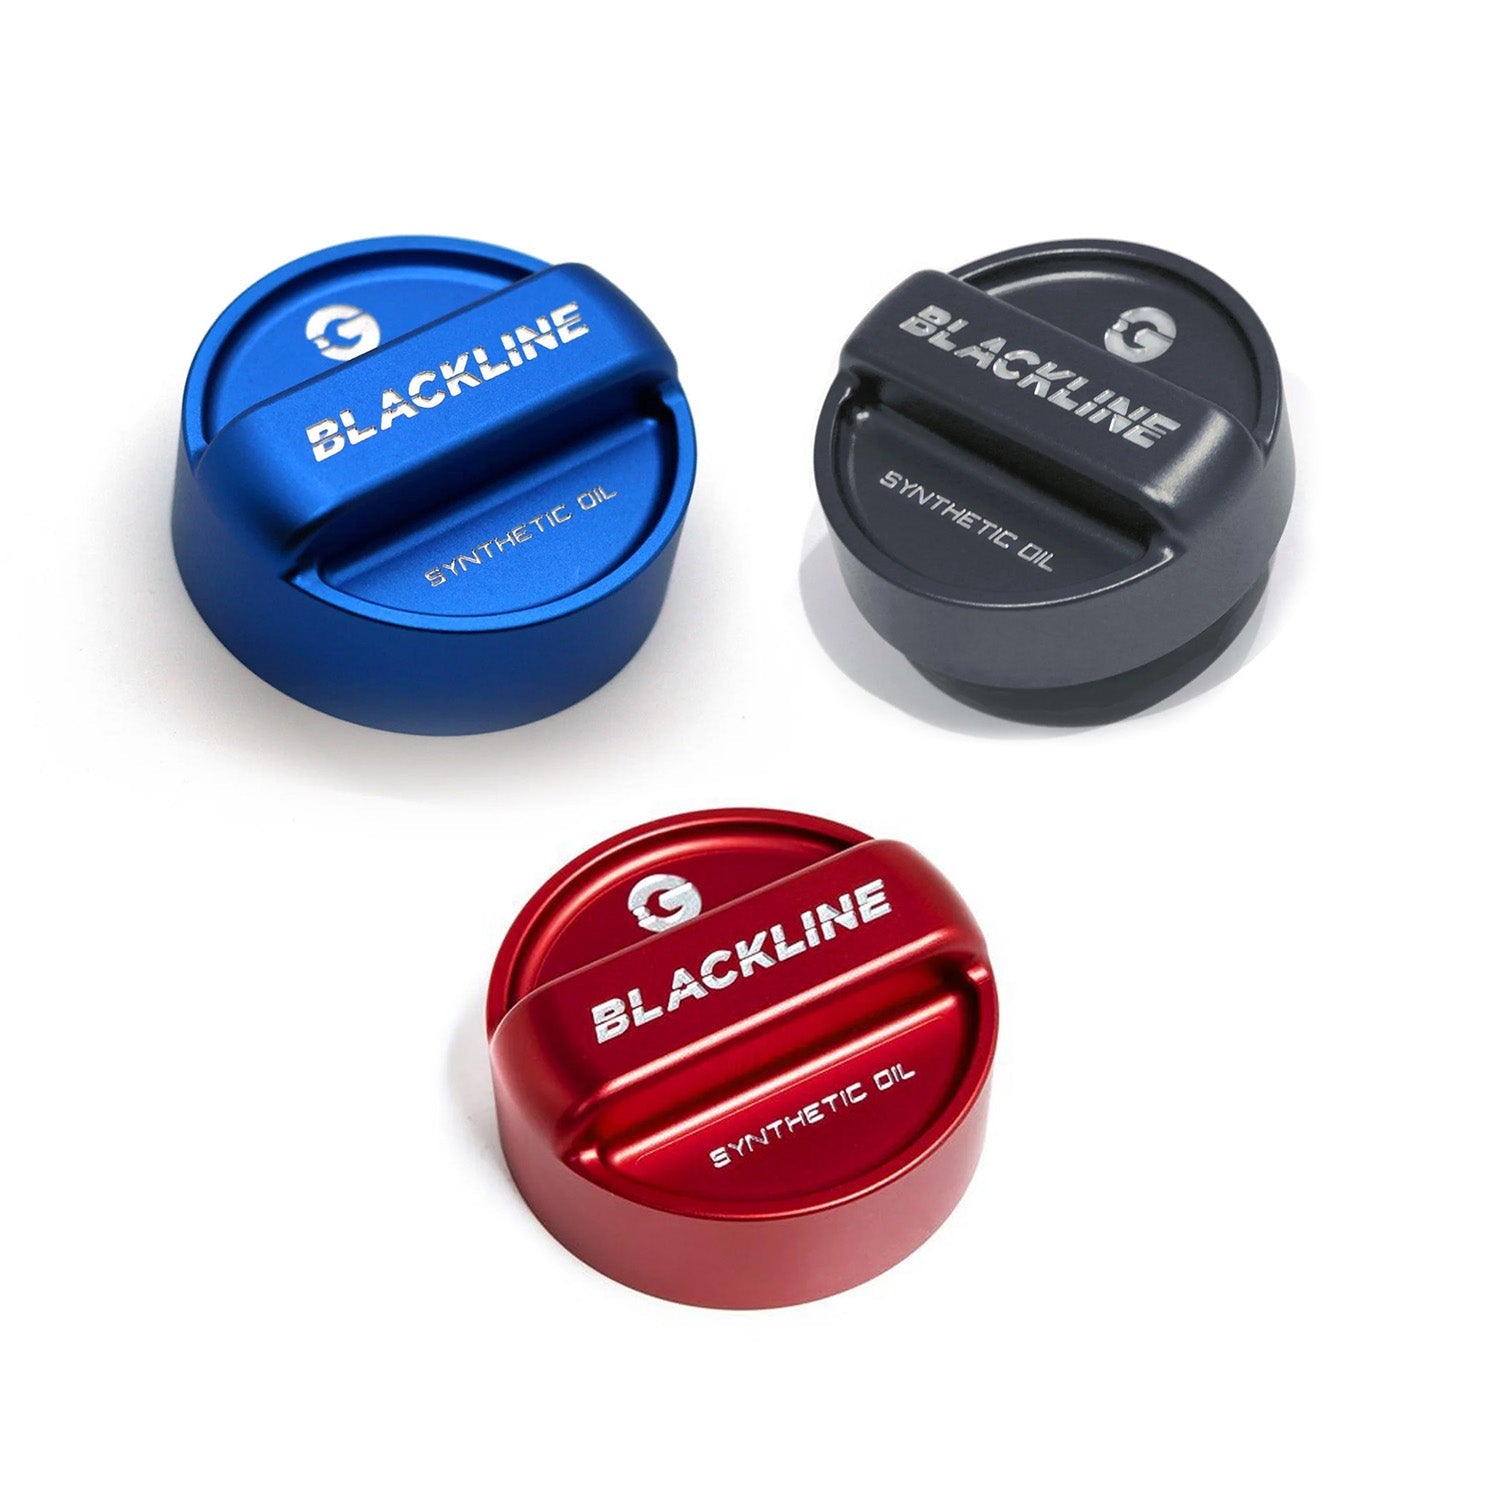 GoldenWrench BMW BLACKLINE Oil Cap Cover For F80 M3, F82 M4, F87 M2 and F10 M5 Availabe in Red, Blue, Grey